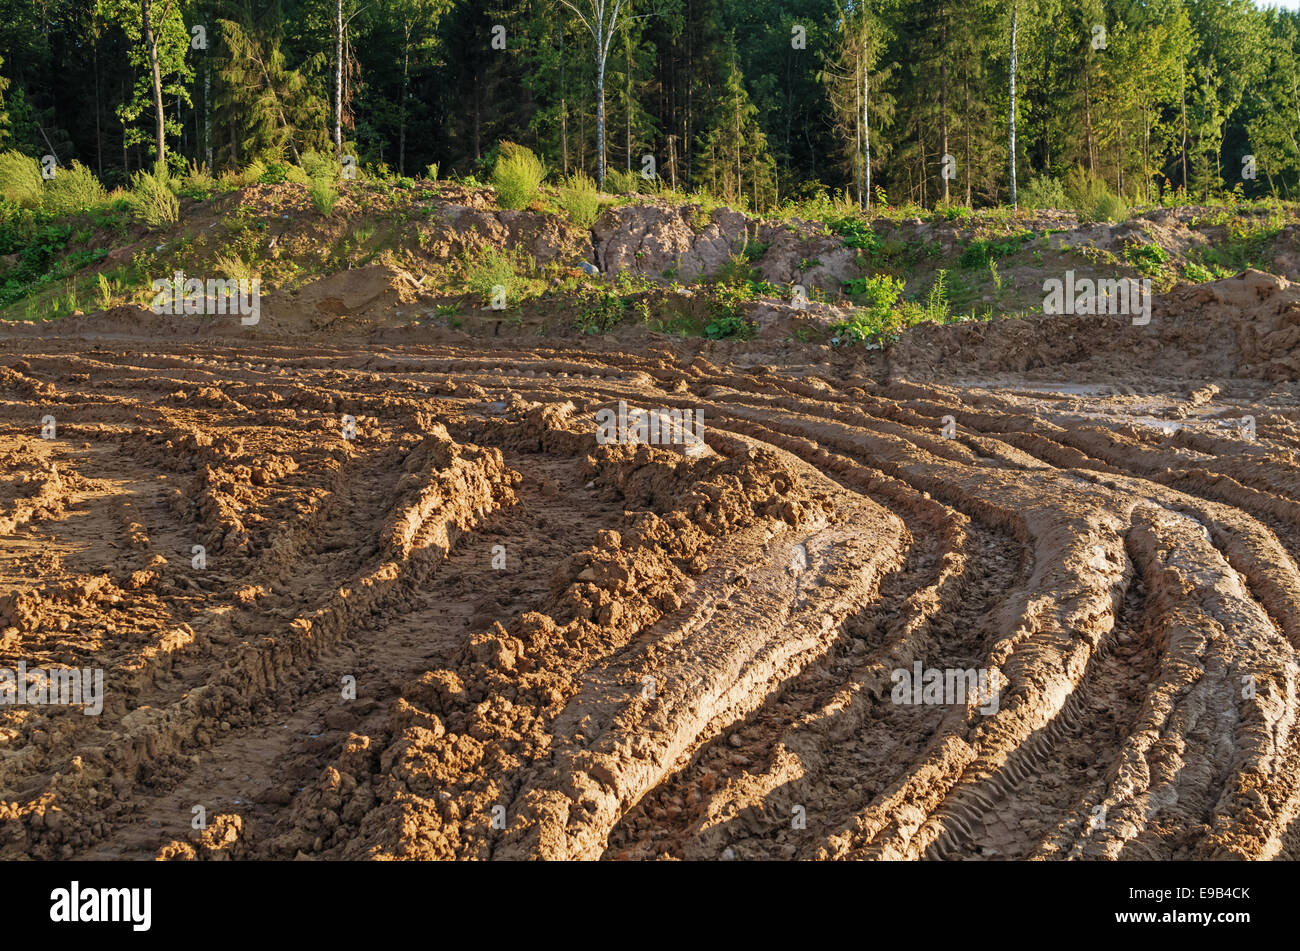 Construction of Vitebsk hydroelectric power station. The dirty clay road and the wood near building. Stock Photo